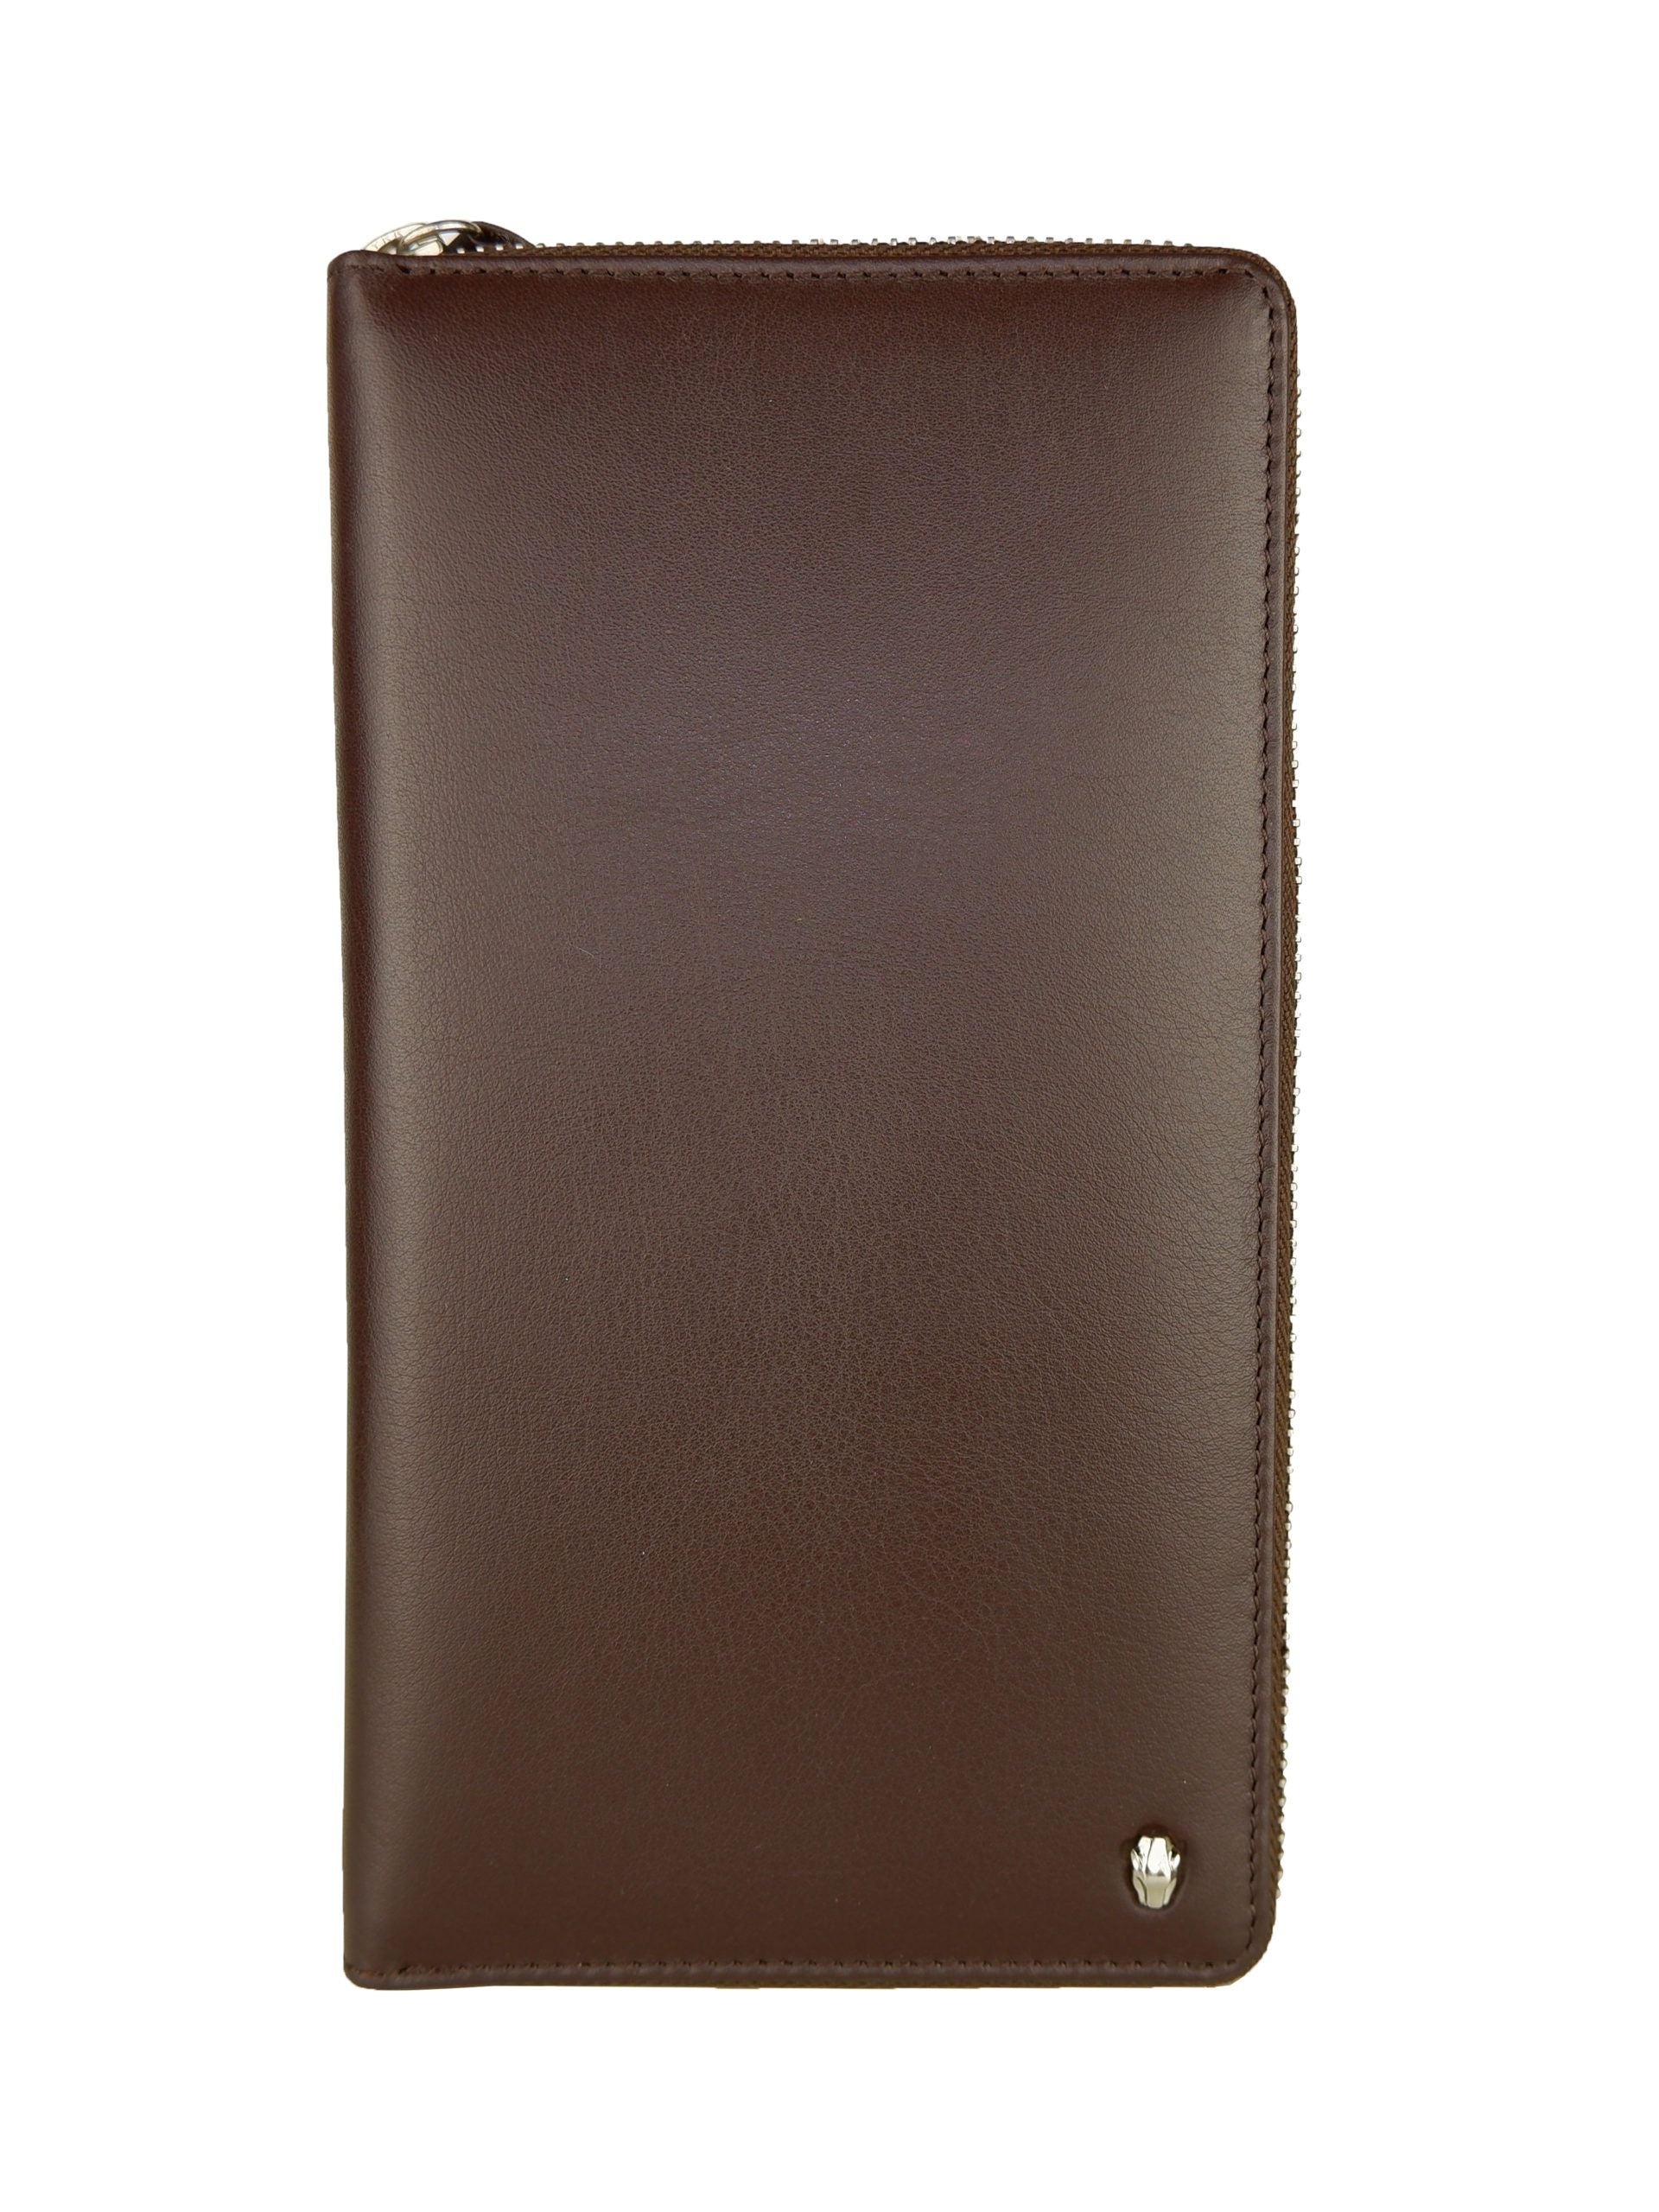 Sophisticated Brown Leather Wallet